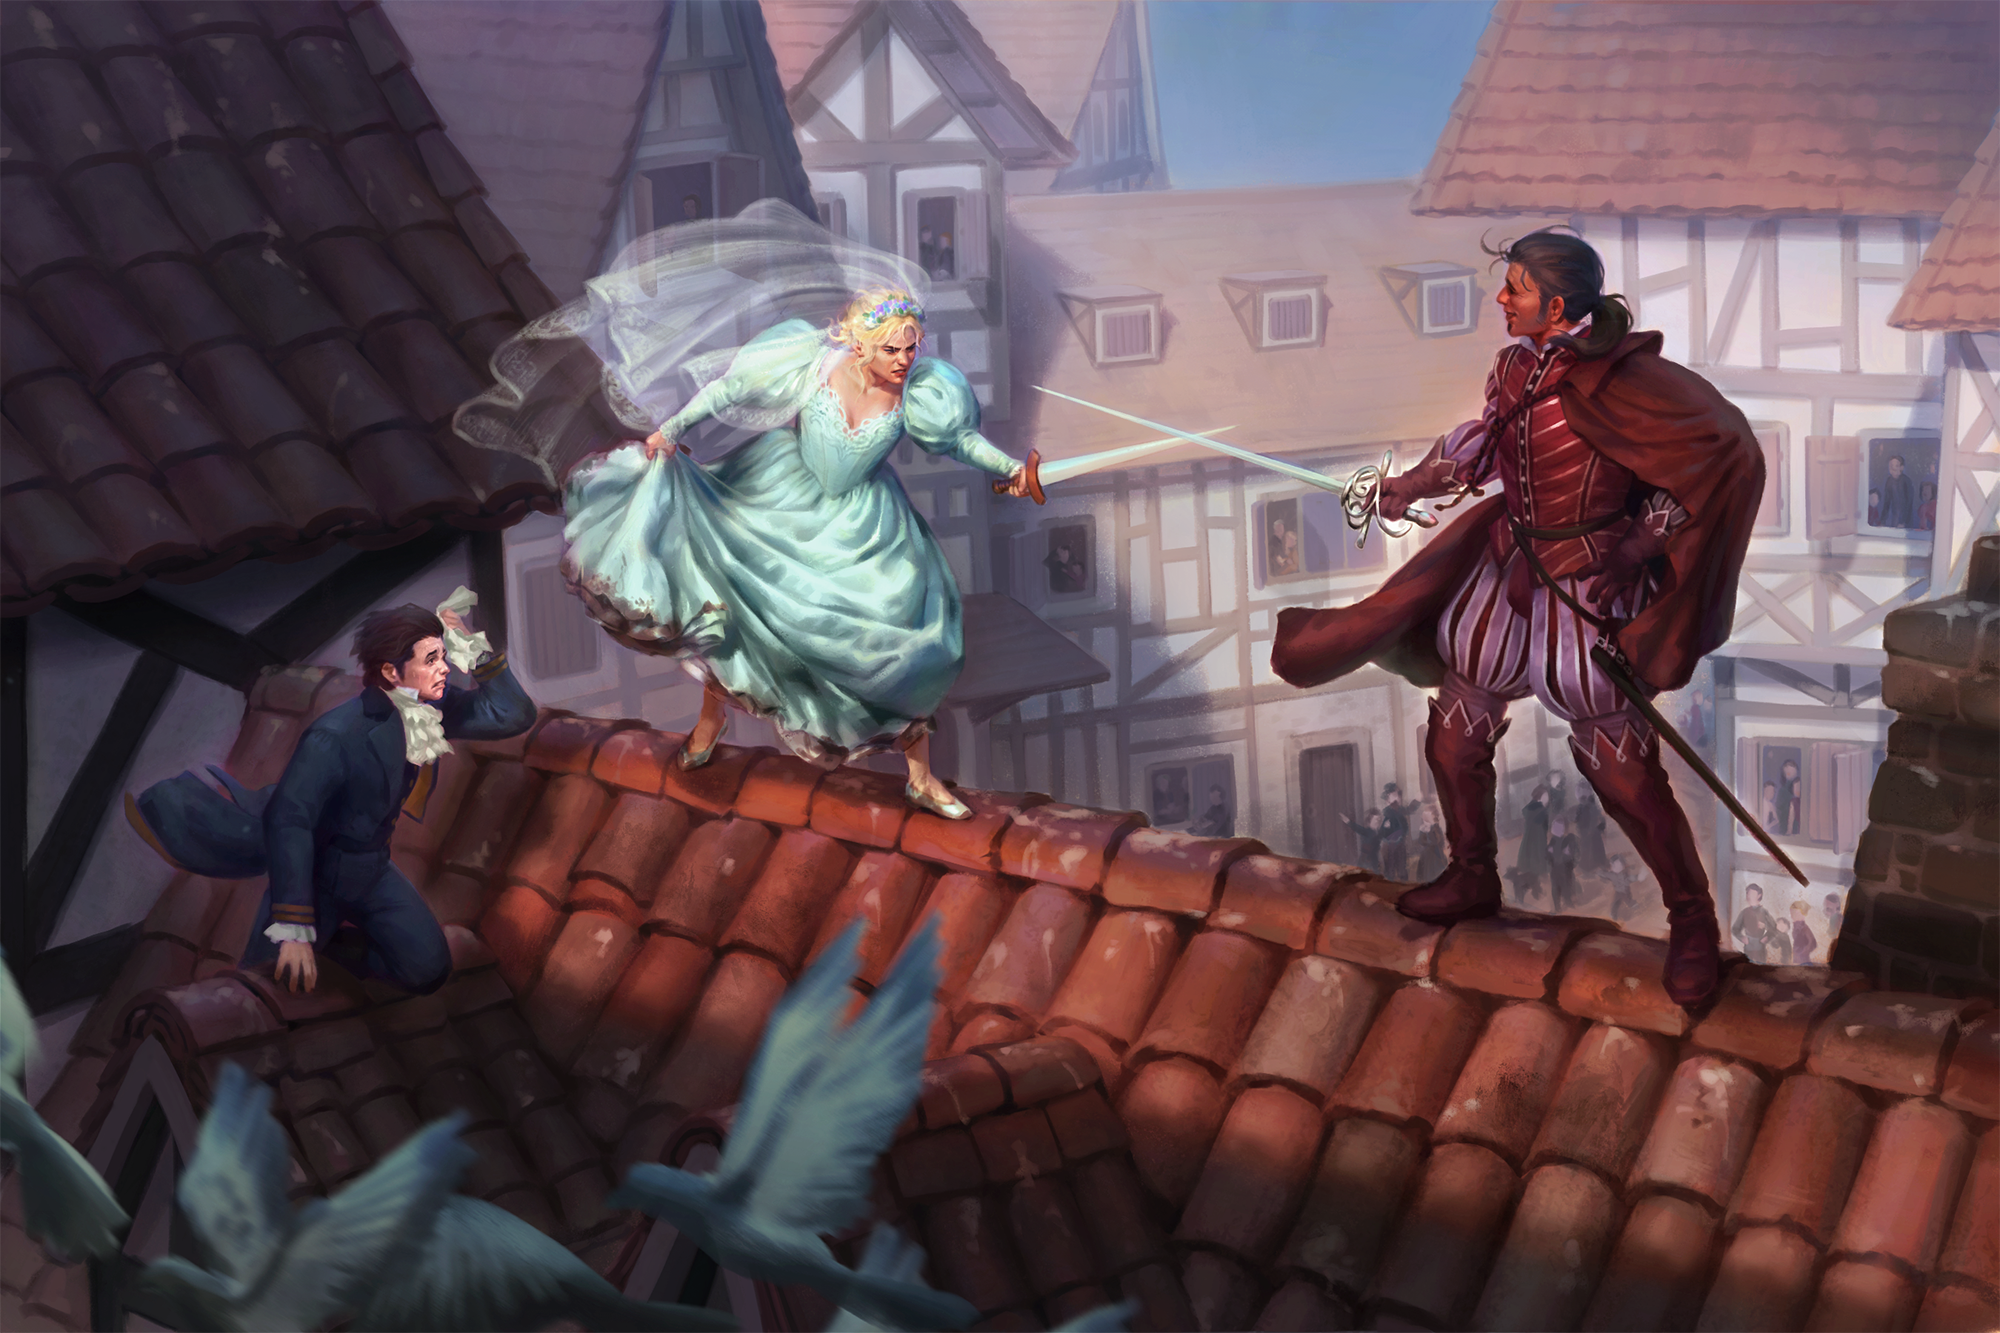 A blonde woman in a wedding dress sword fighting a dapper dressed man on a city roof